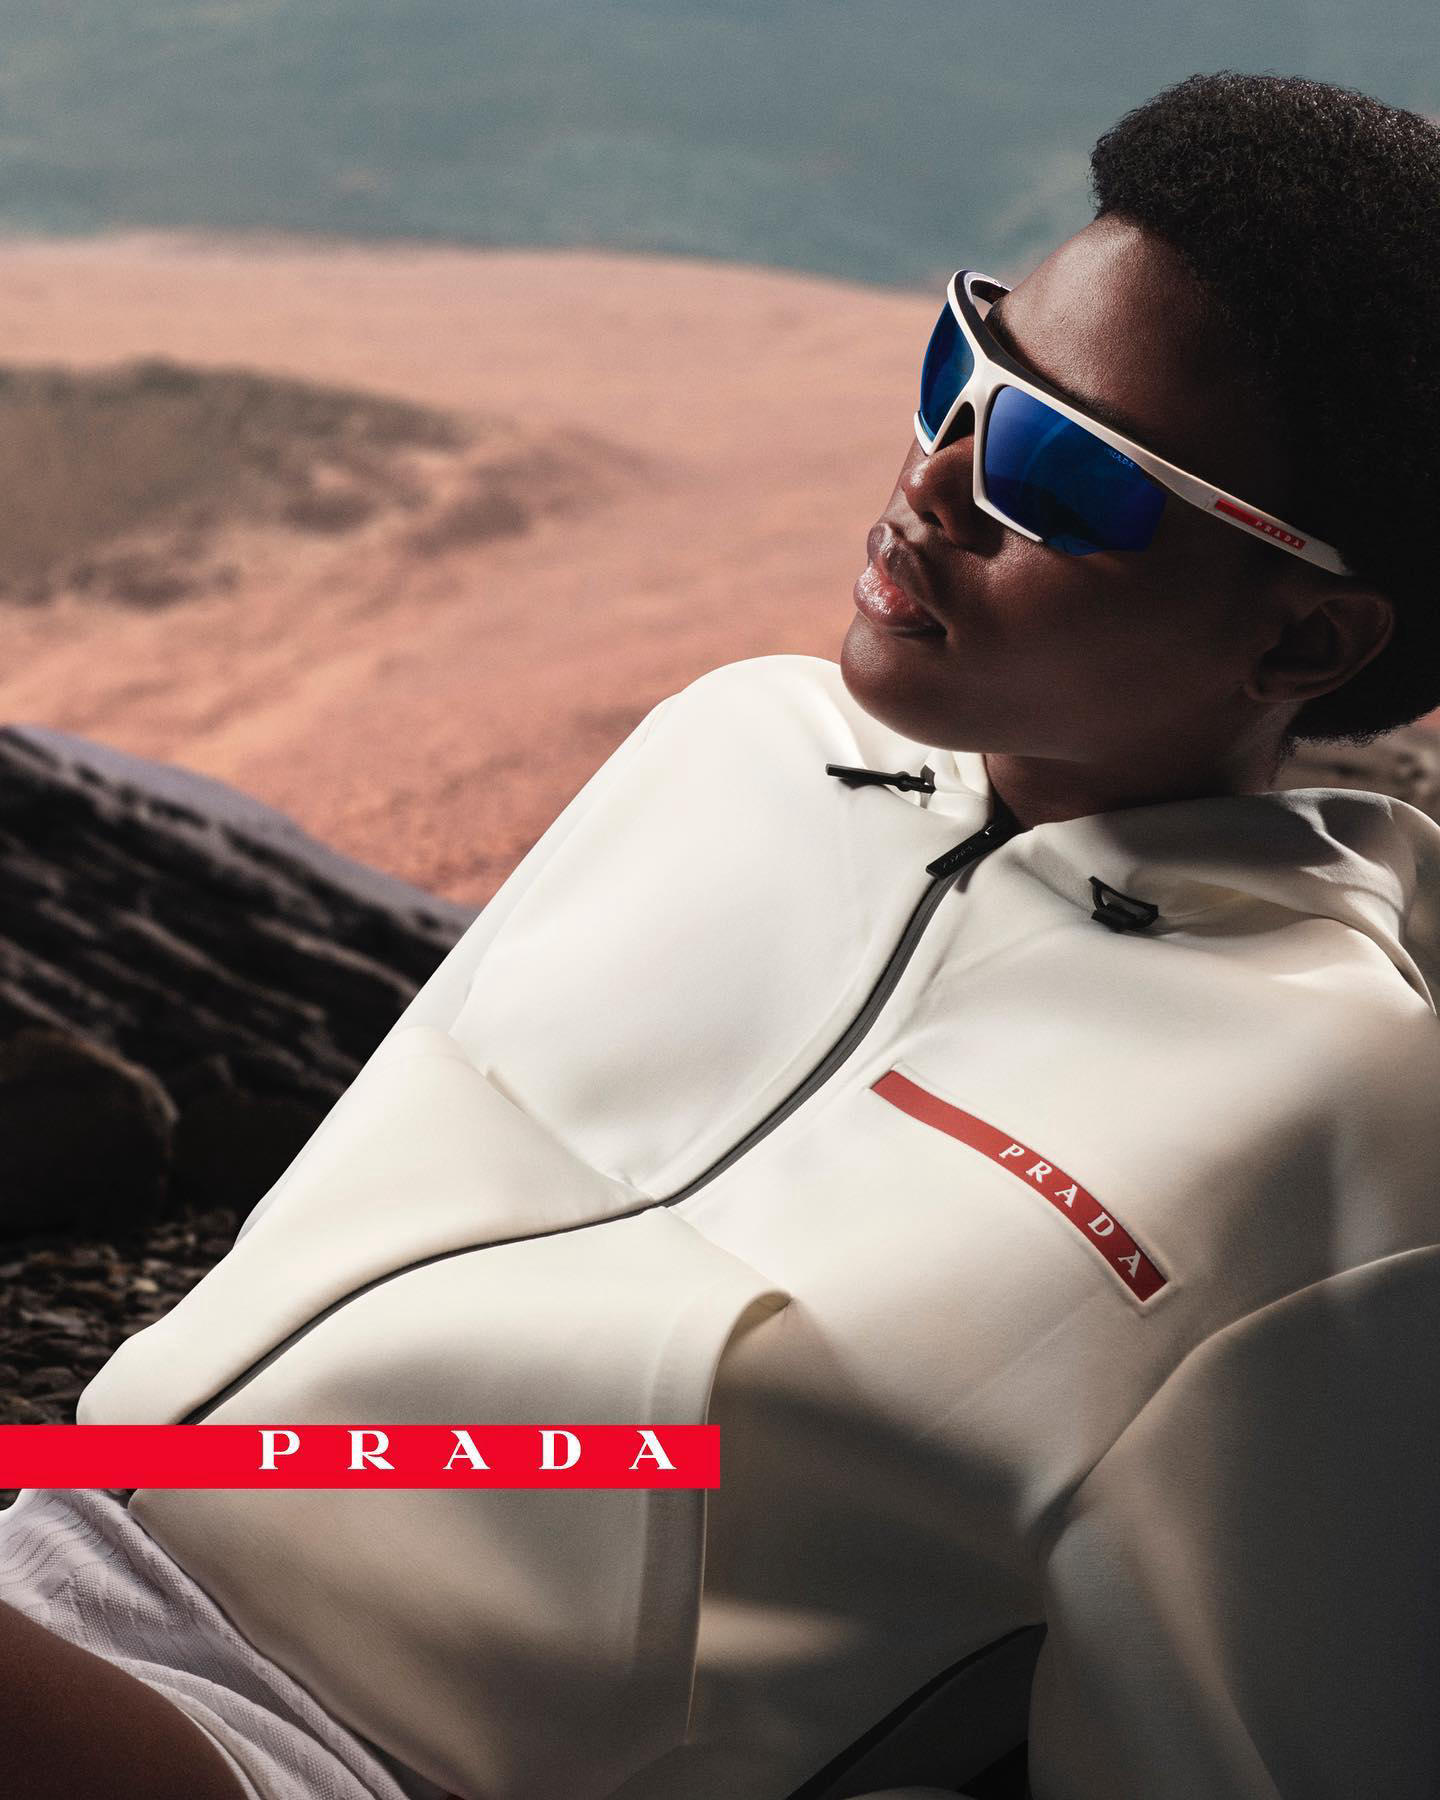 Prada Linea Rossa decodes the ever-shifting needs of modern living, proposing advanced functionality